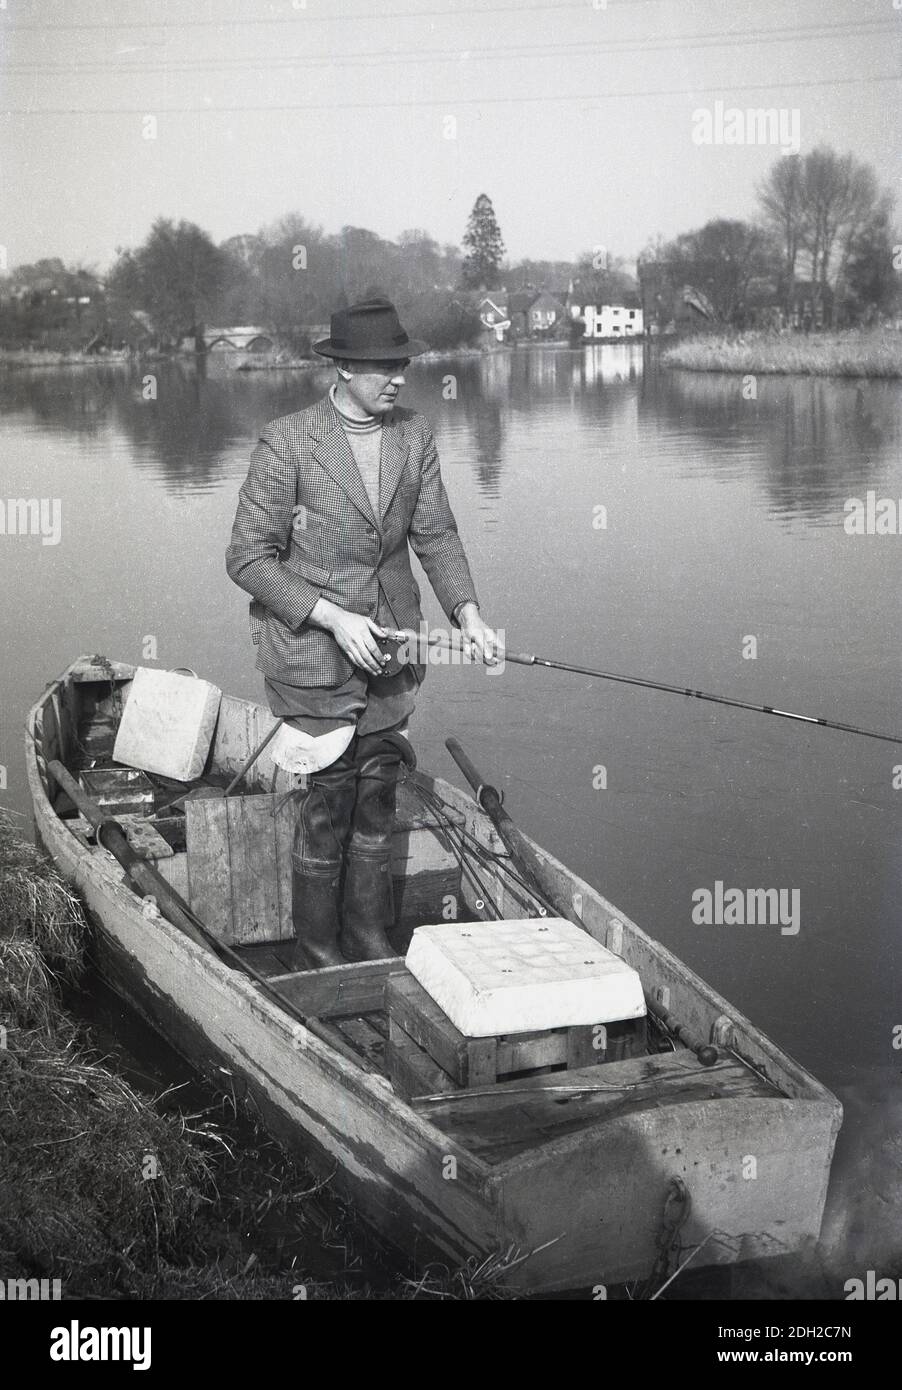 1950s, historical, on a calm English river, a picture of a gentleman fishing. Standing in a small wooden boat by the riverbank, and wearing long knee length wellington boots, a check jacket and hat, with fishing rod in hat, England, UK. Stock Photo